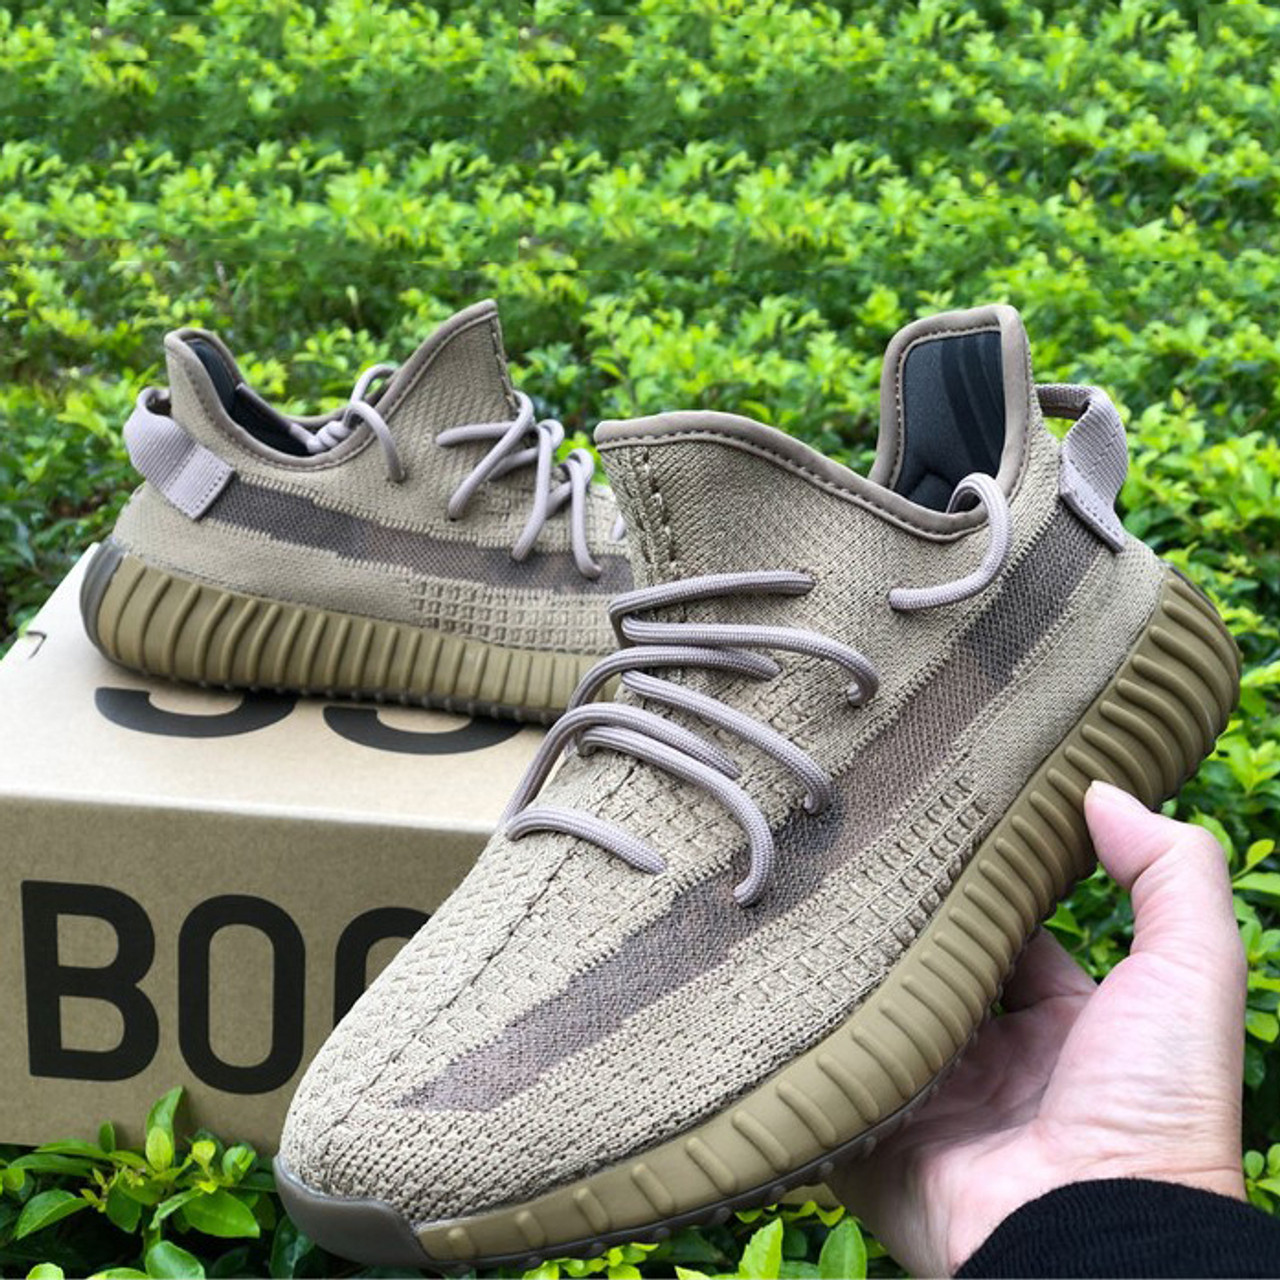 where to buy the best stockX UA High quality replica Adidas Yeezy boost 350  v2 "Marsh" colorway Sneaker Hypedripz is the best high quality trusted  clone replica fake designer hypebeast seller website